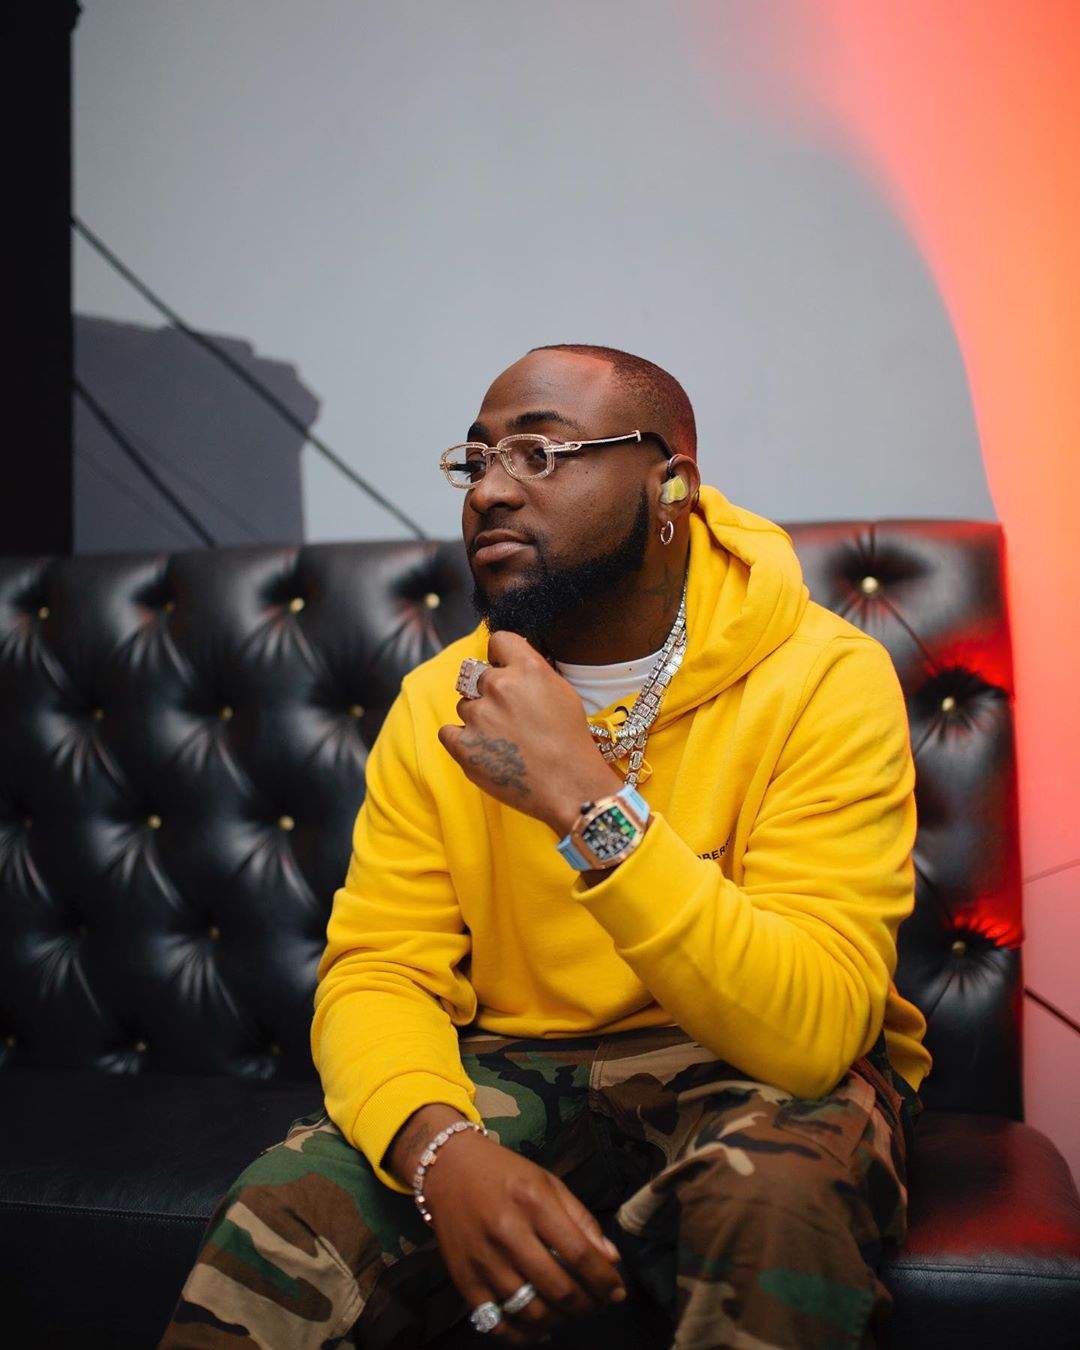 Upon pressure from fans, Davido redoes Covid-19 test again; comes out negative